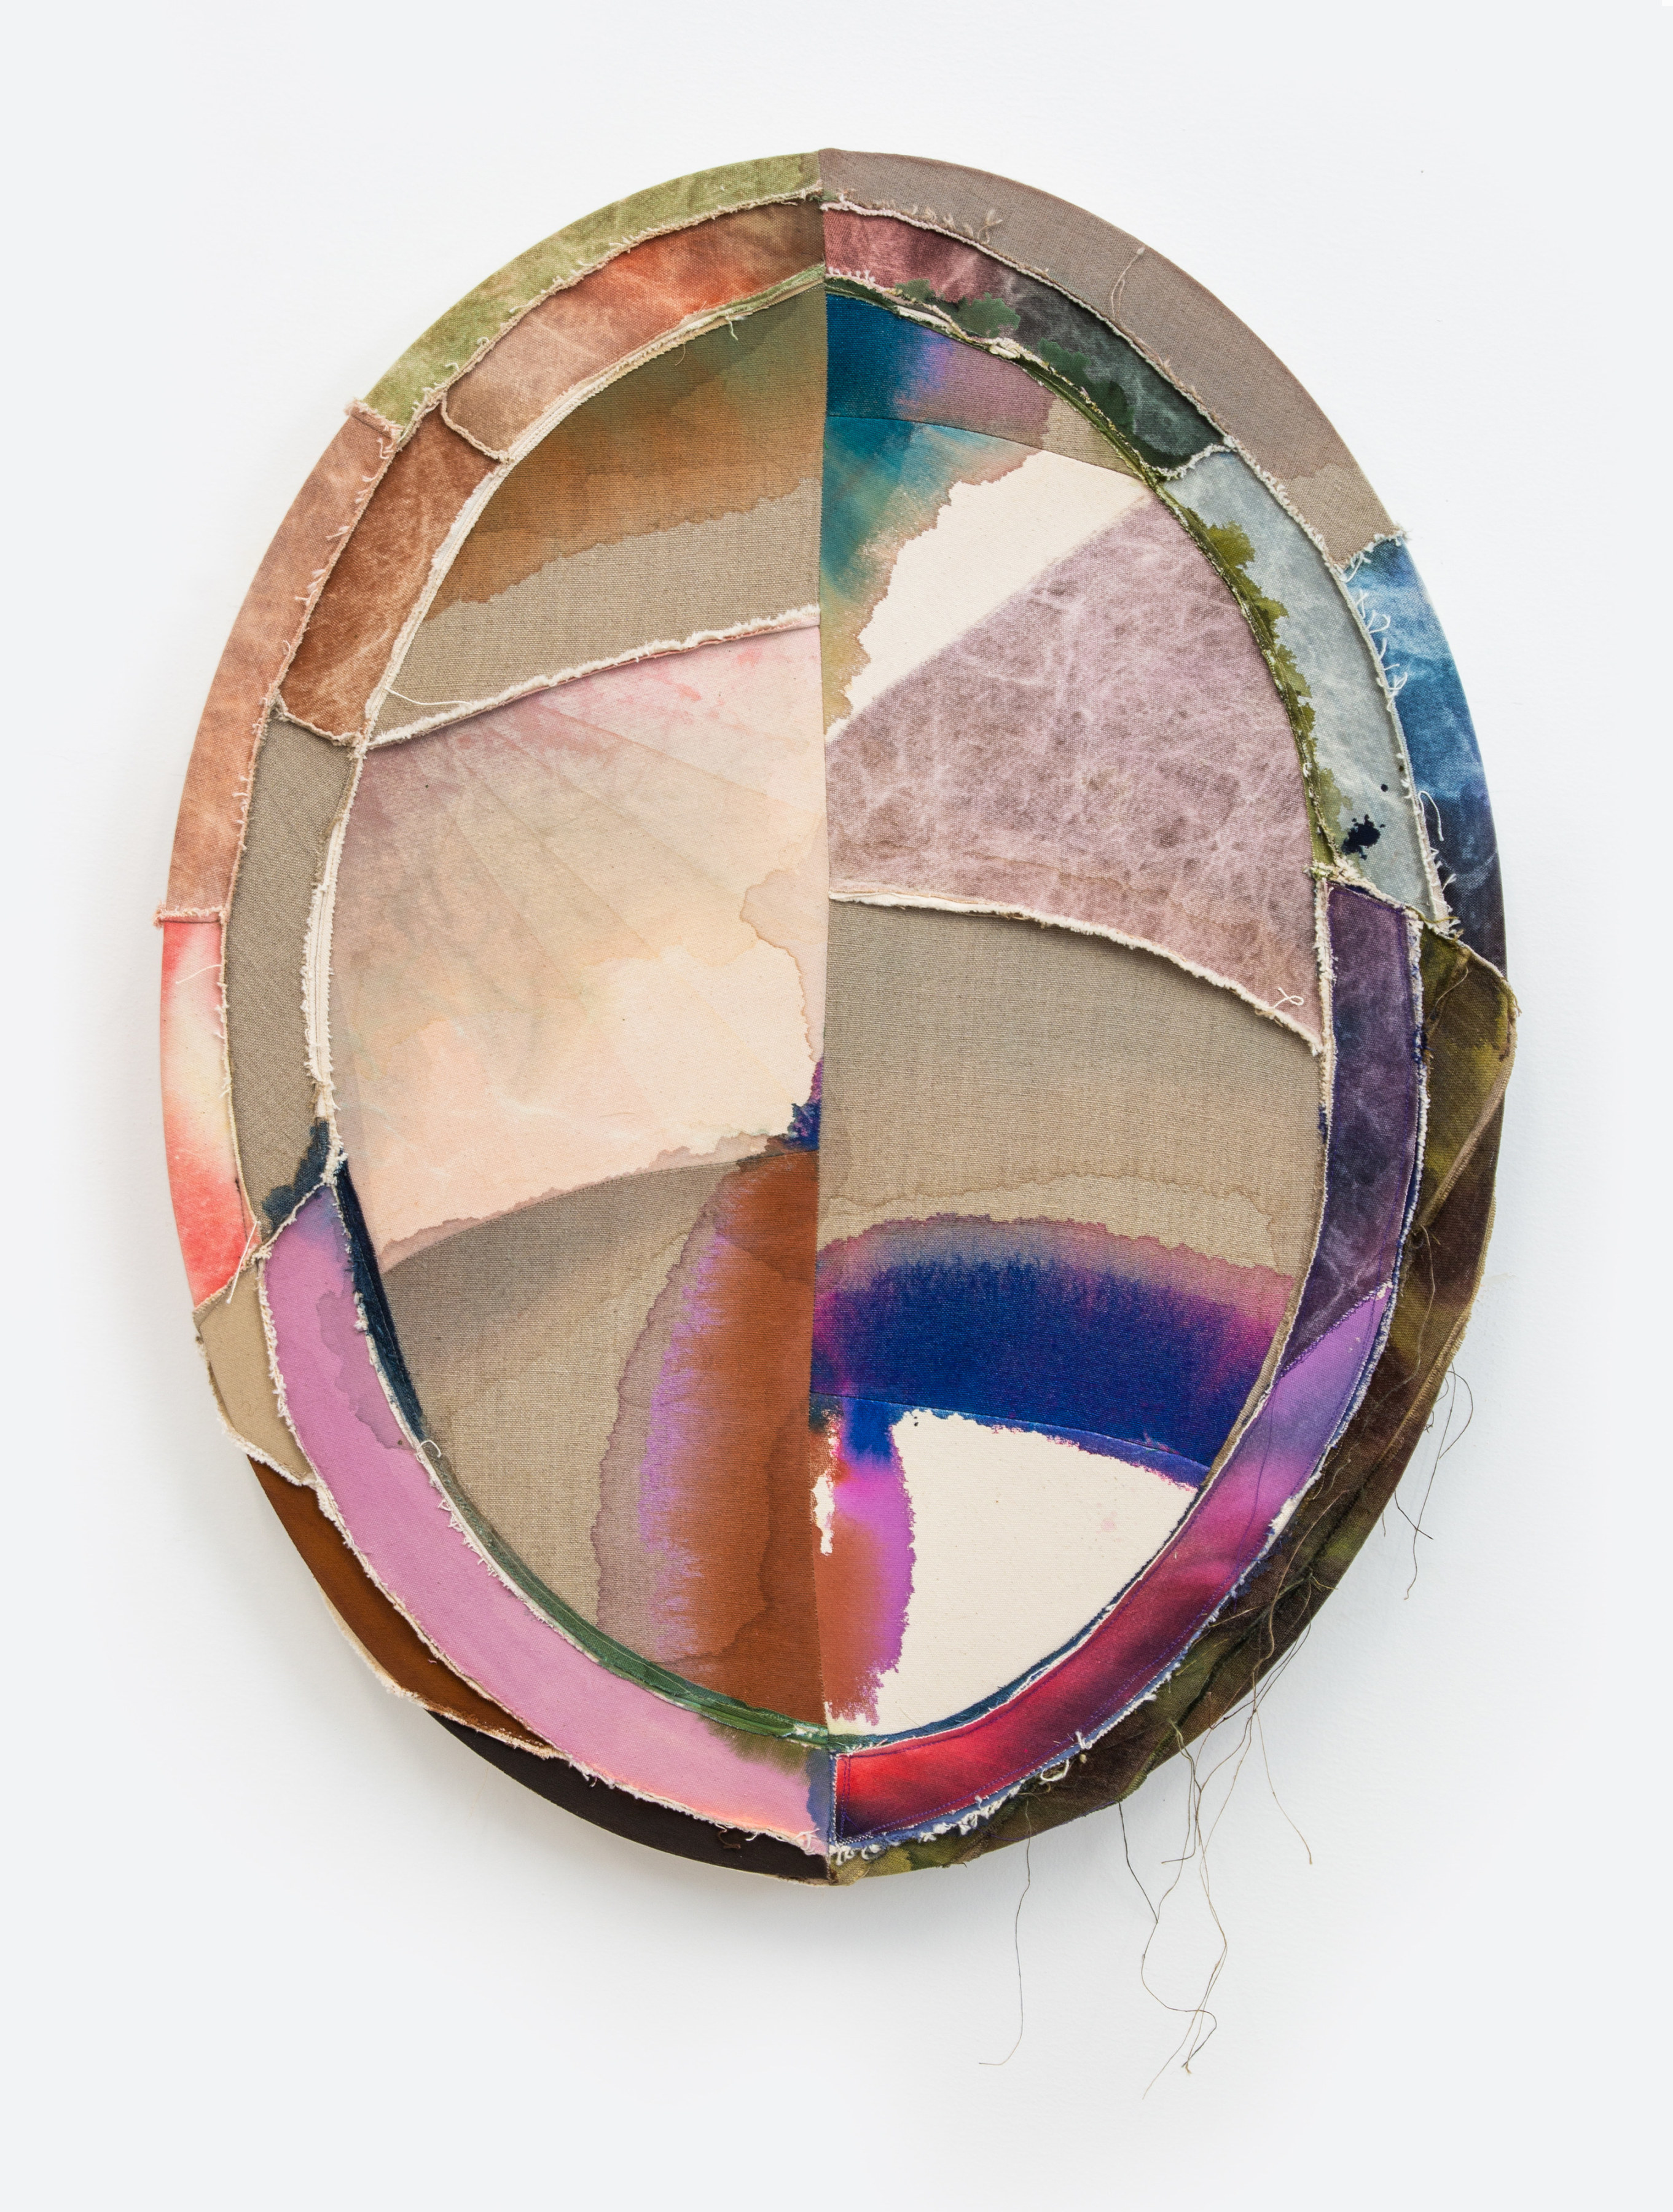 Elaine Stocki, The Ghost of Paintings Past, Oval, 30 inch, February, 2021, 2021